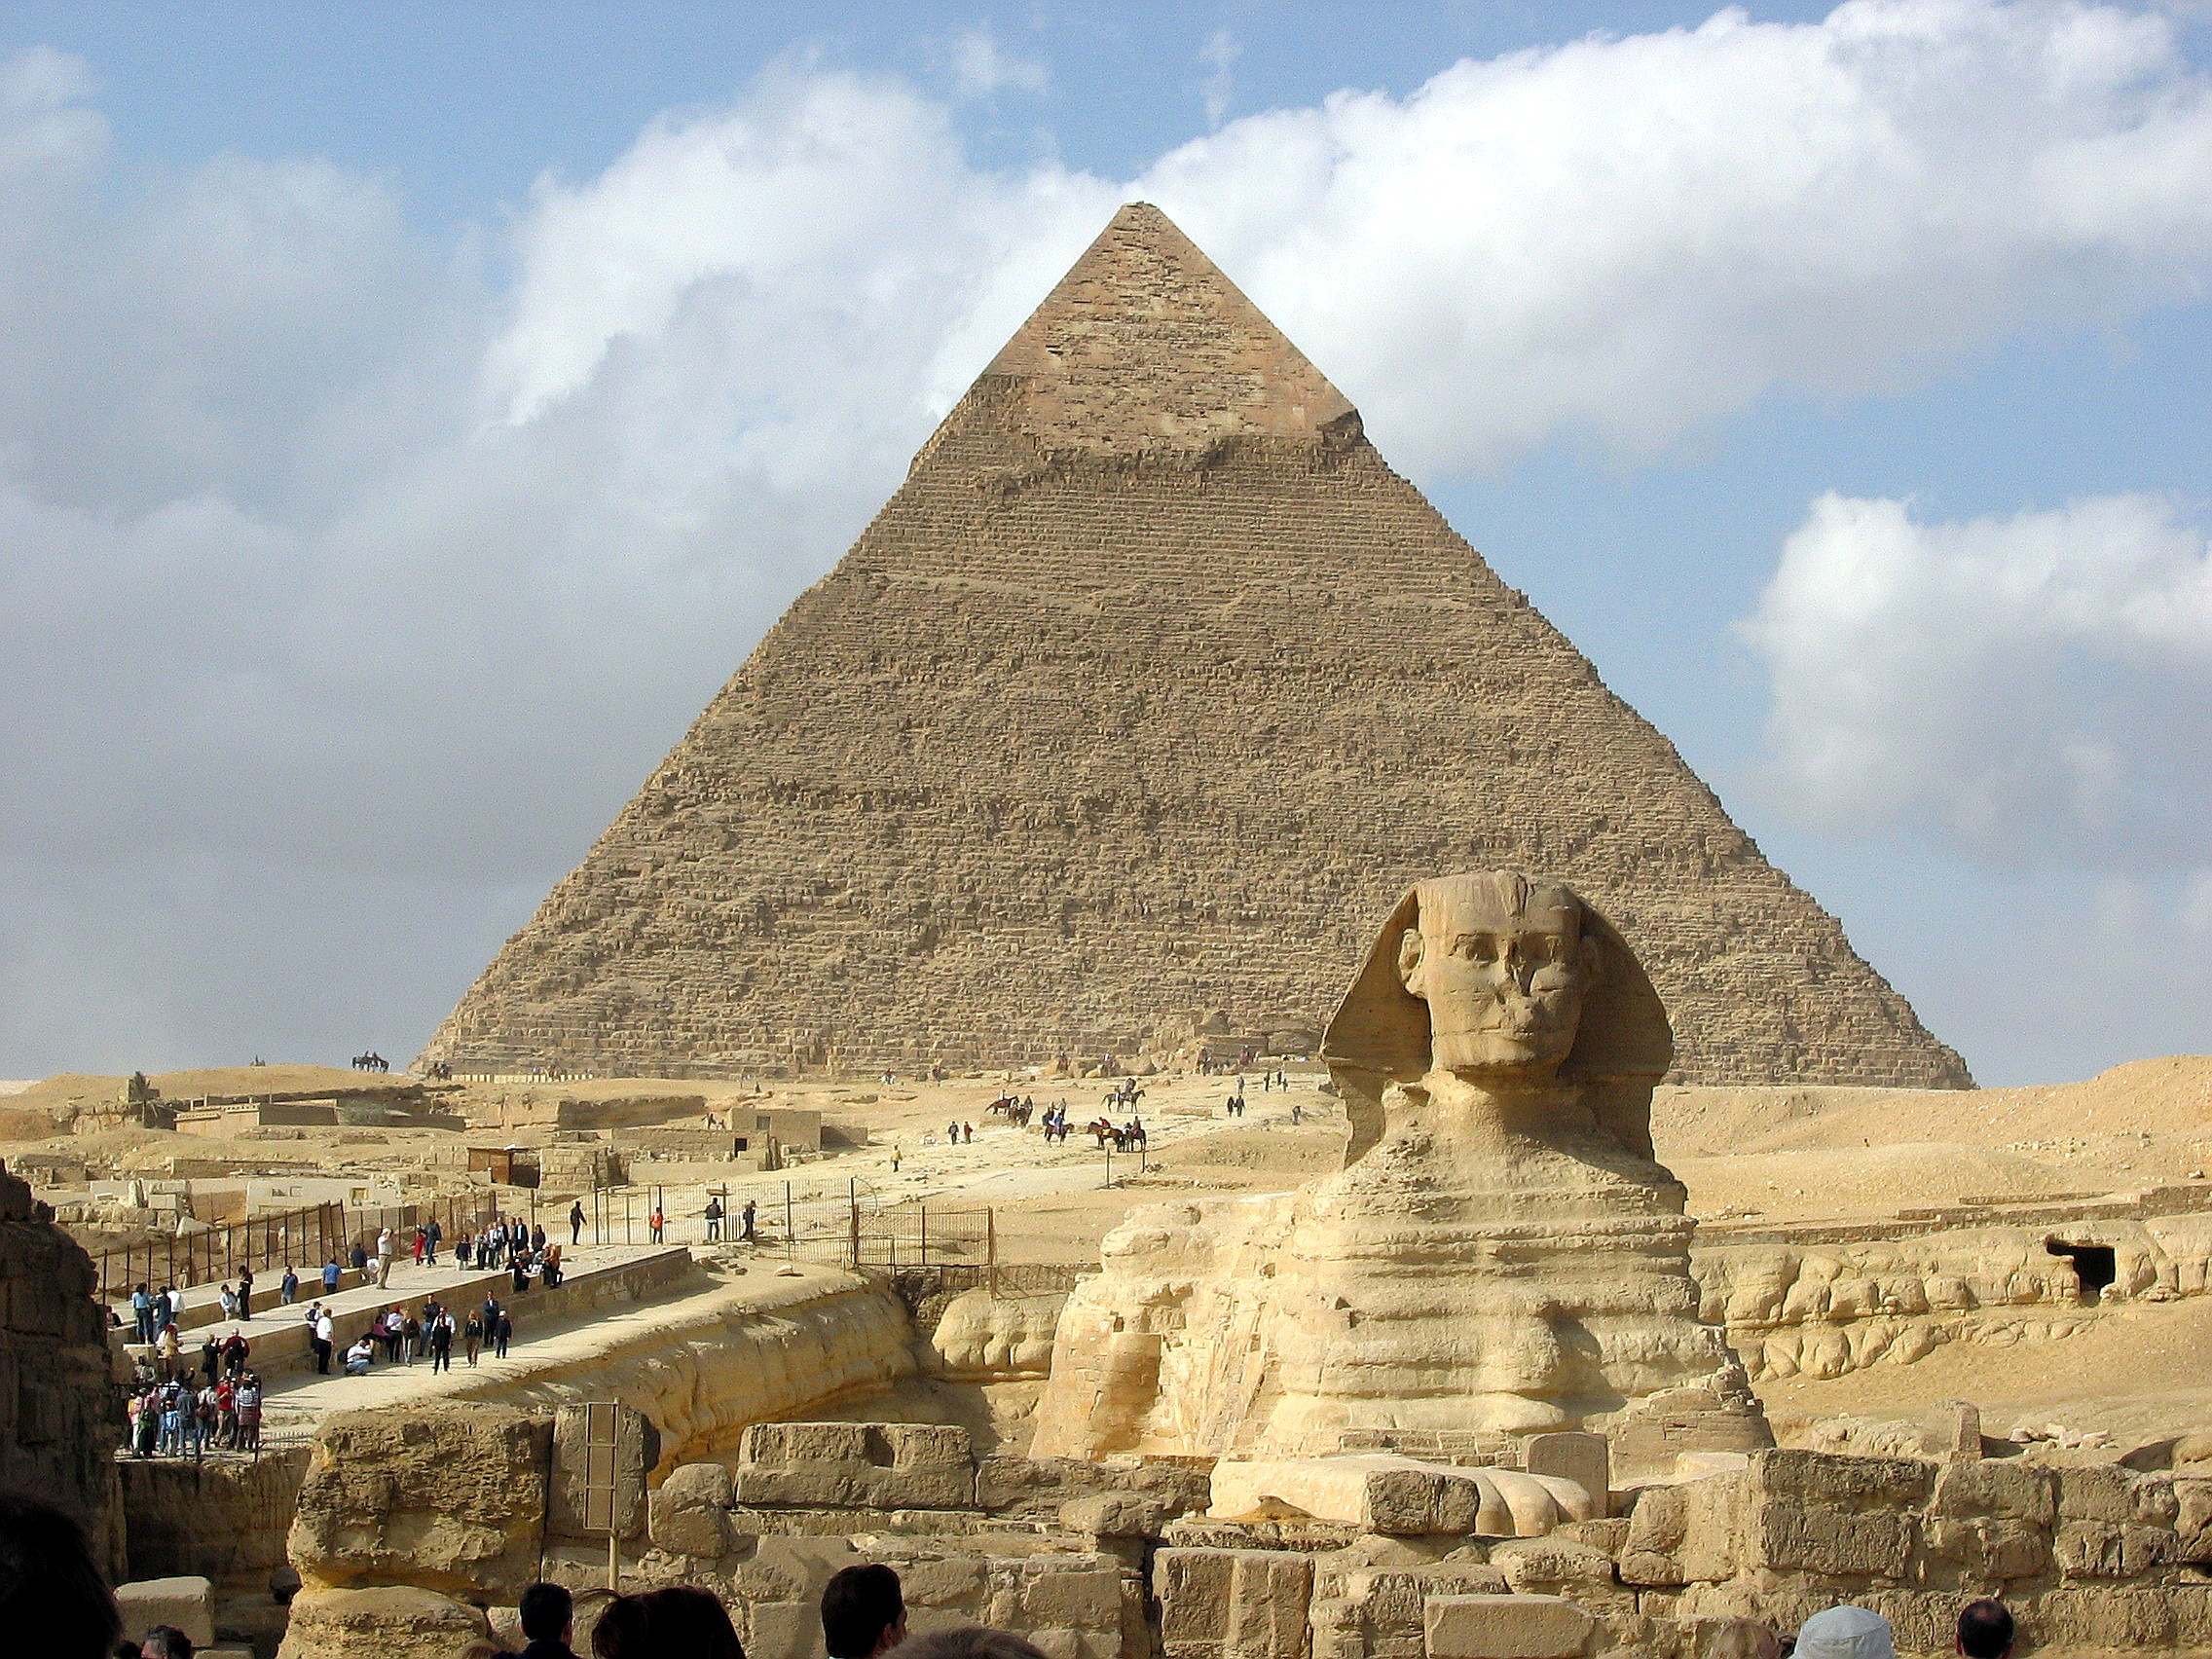 The Great Sphinx of Giza and the pyramid of Khafre. Photo taken on January 2, 2005.